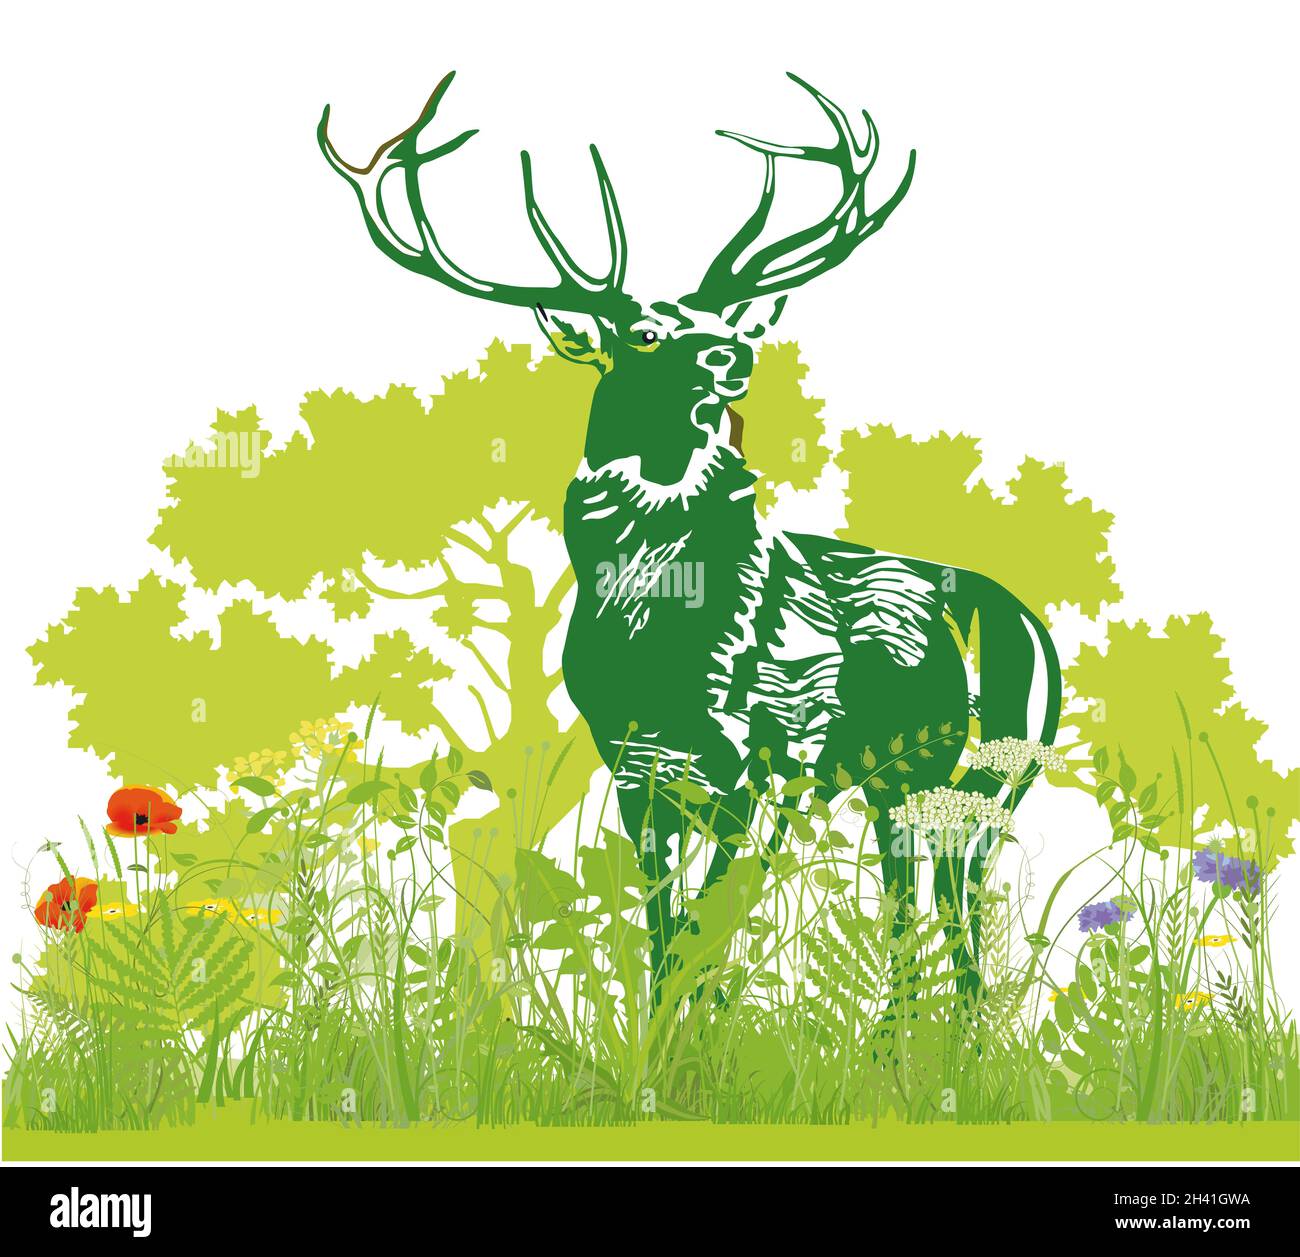 Deer in the meadow illustration Stock Photo